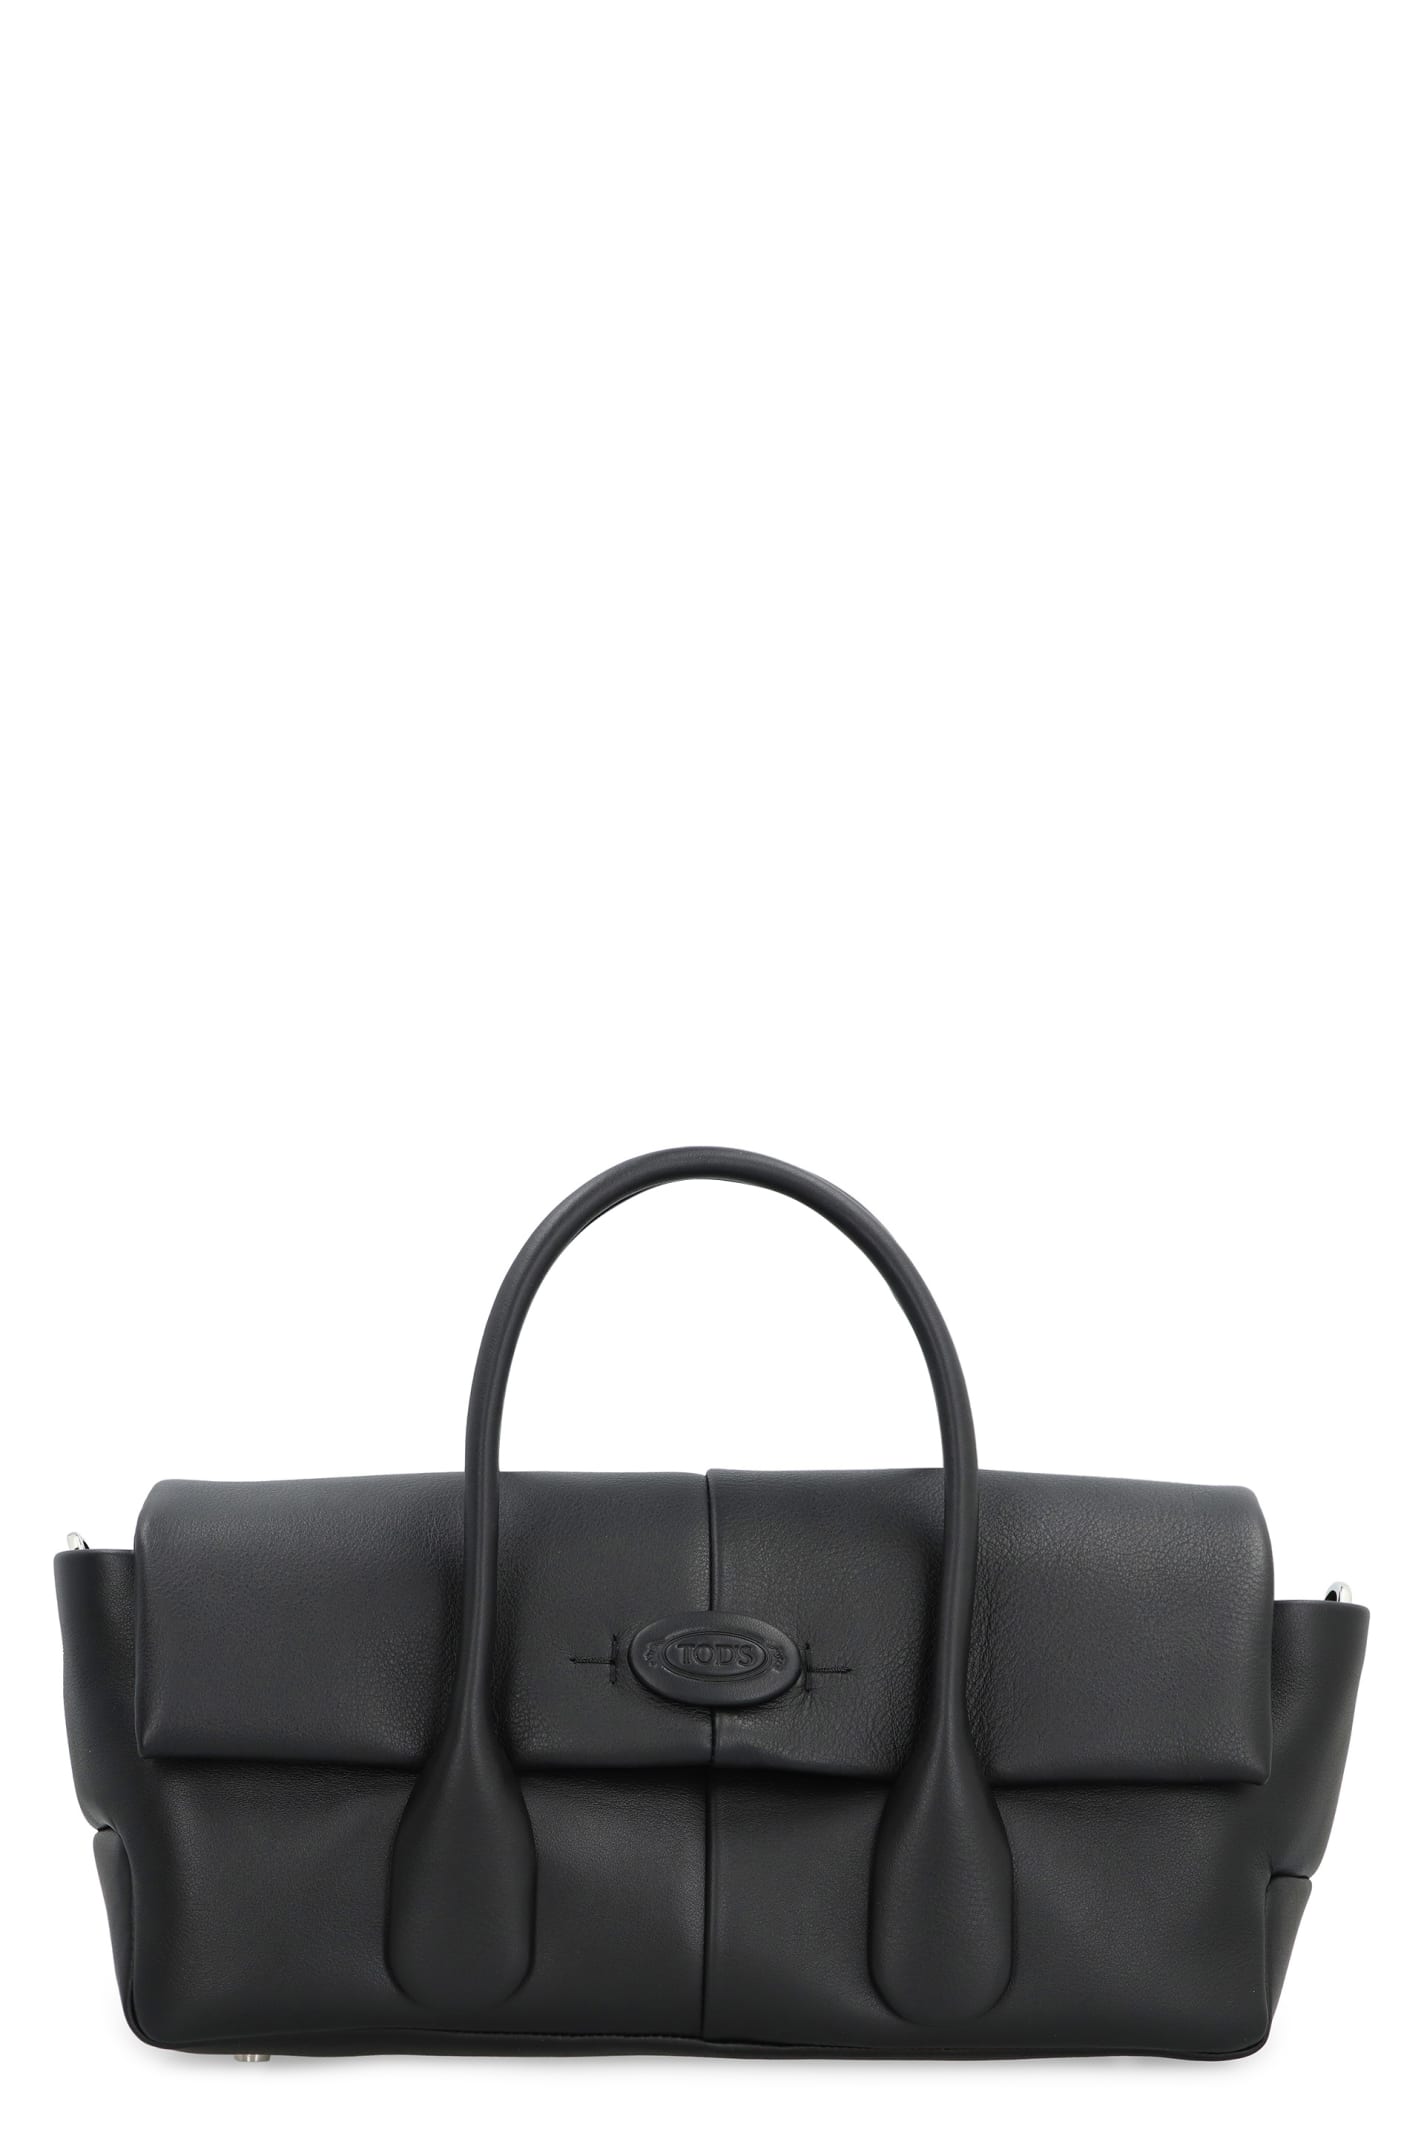 Tod's Tods Di Leather Bag In Black